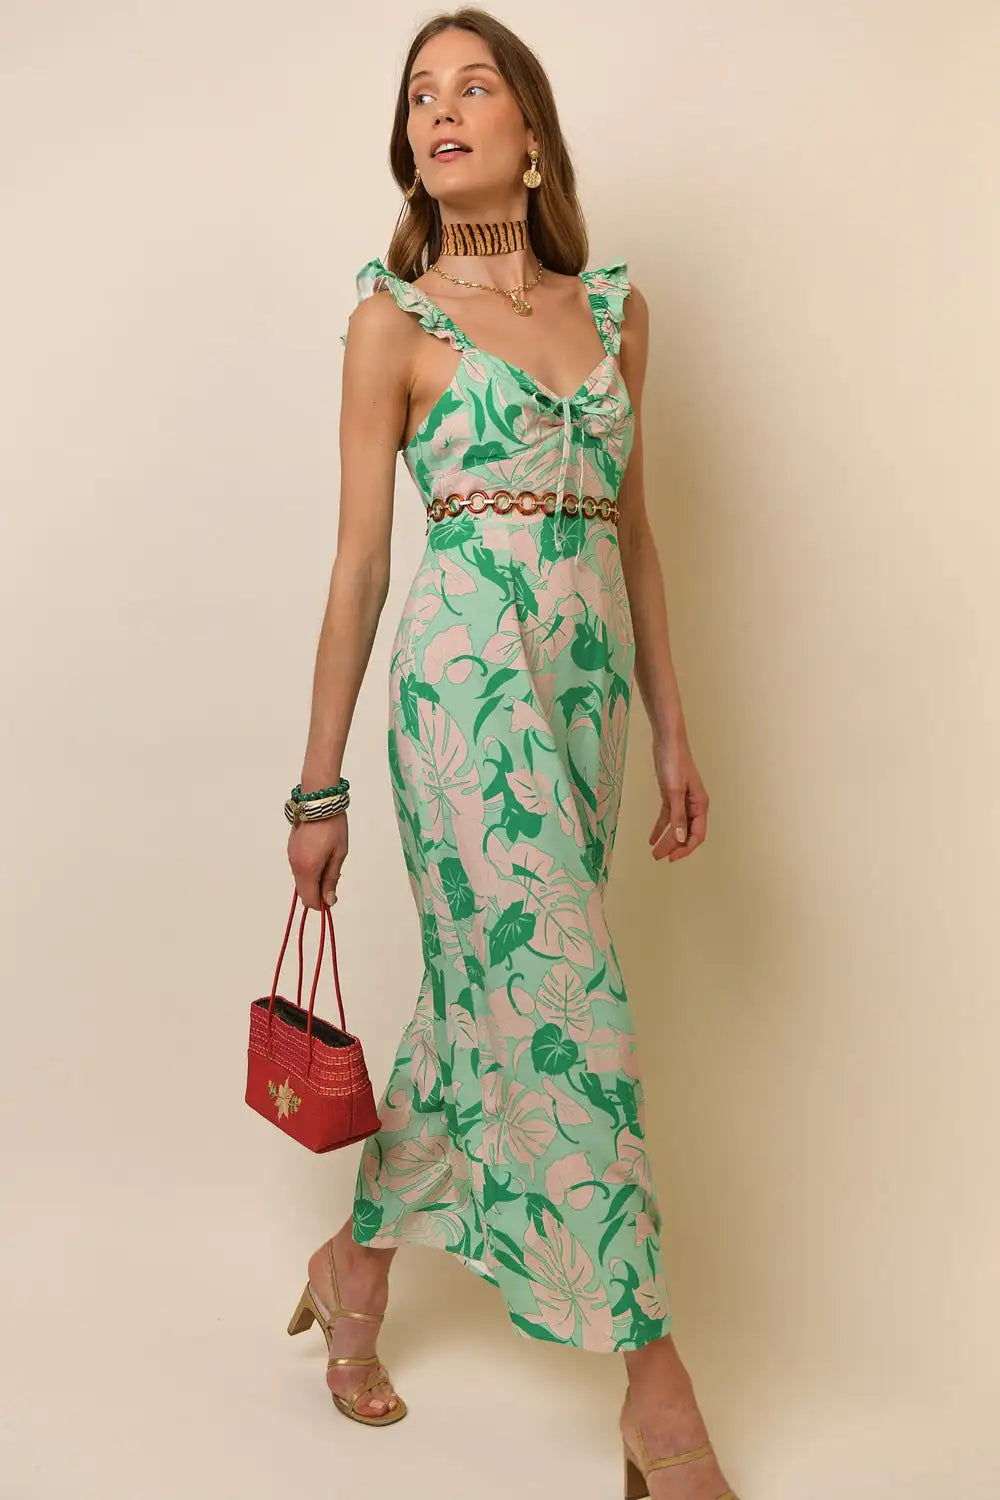 Elevate your style with the Rixo Cecile Ruffled Printed Linen-blend Midi Dress in green. Perfect for any occasion, this dress features a playful ruffled design and is made from a comfortable linen-blend fabric. Make a statement and feel confident in this stunning dress.